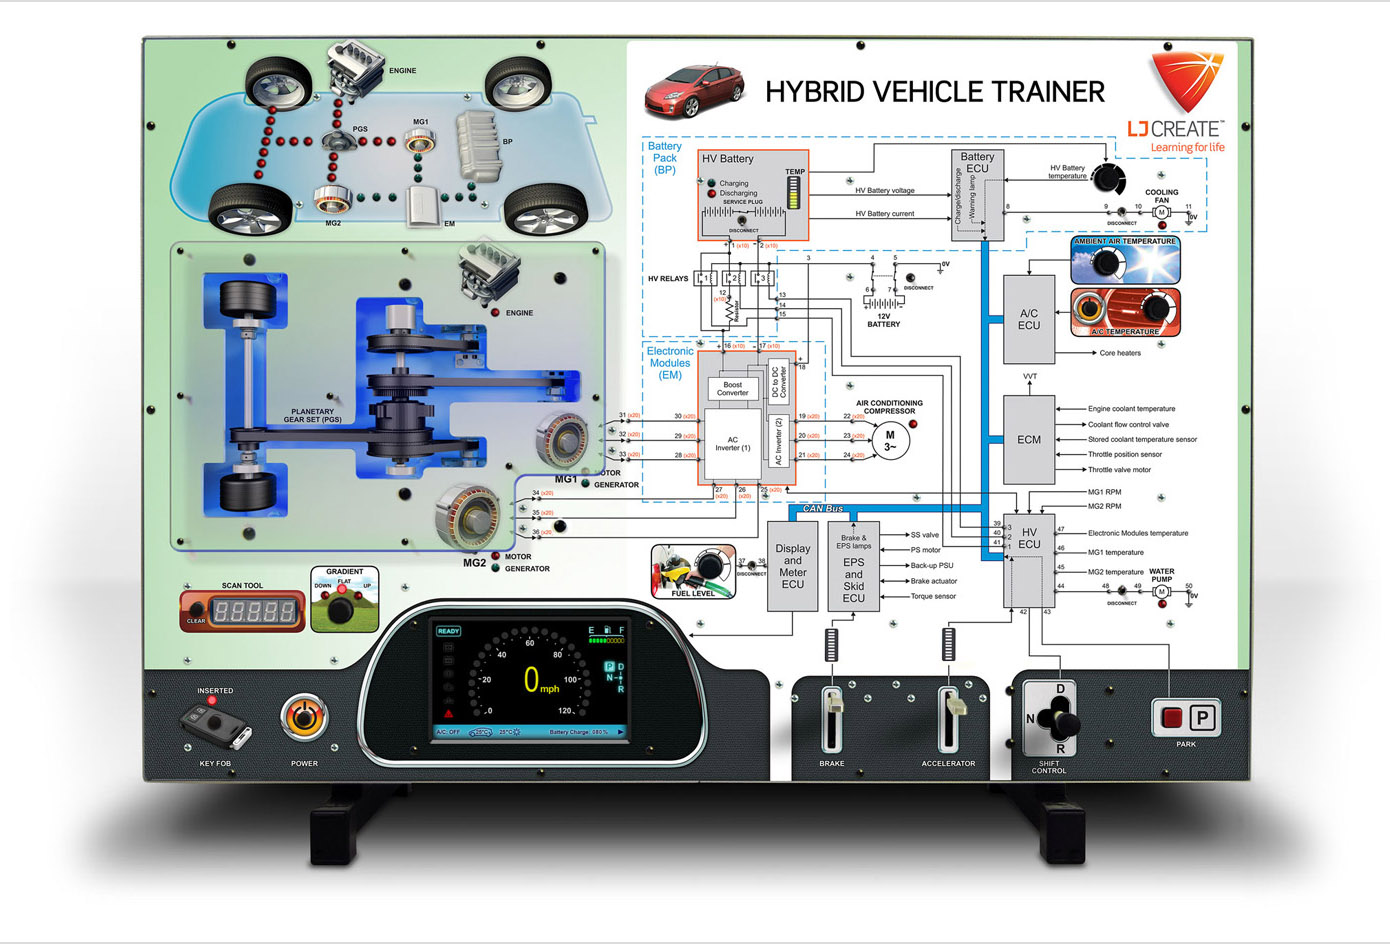 Hybrid and Electric Vehicle Trainer TechLabs